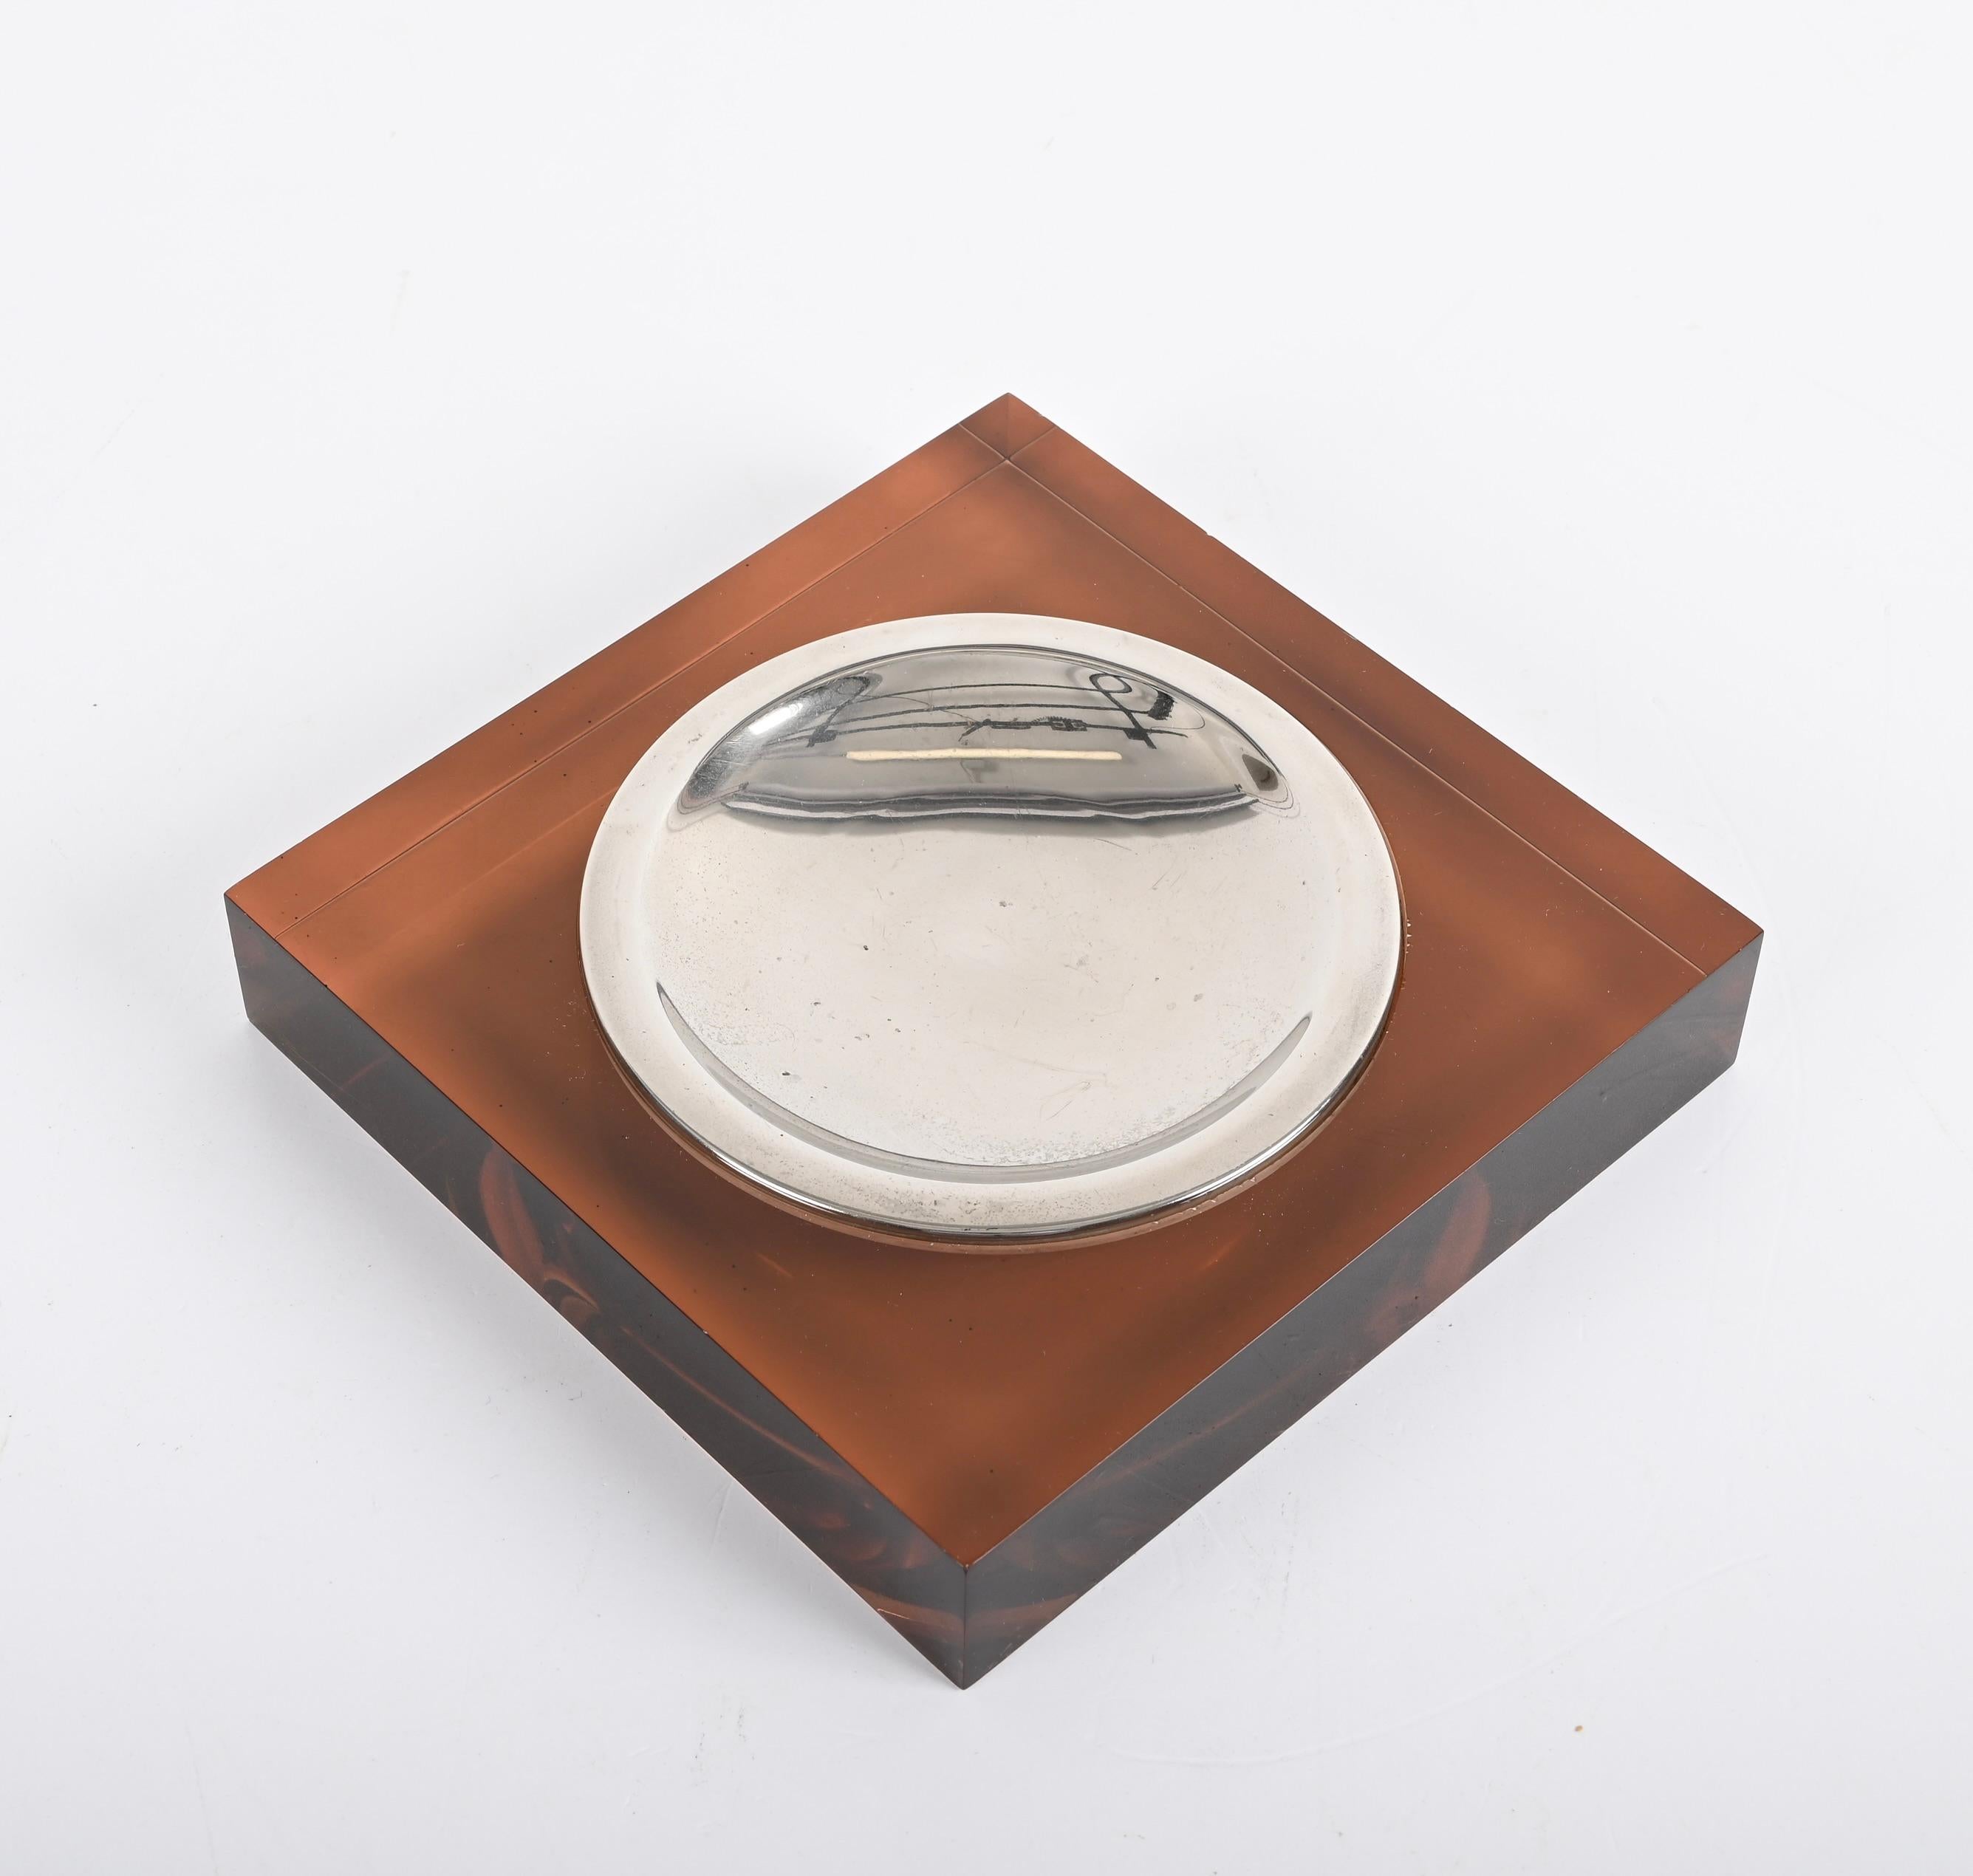 Wonderful dark amber lucite and chromed metal ashtray. This fantastic item was designed in Italy during the 1970s following the style of Willy Rizzo.

This ashtray is fantastic because it has a wonderful straight-lined dark amber lucite on the